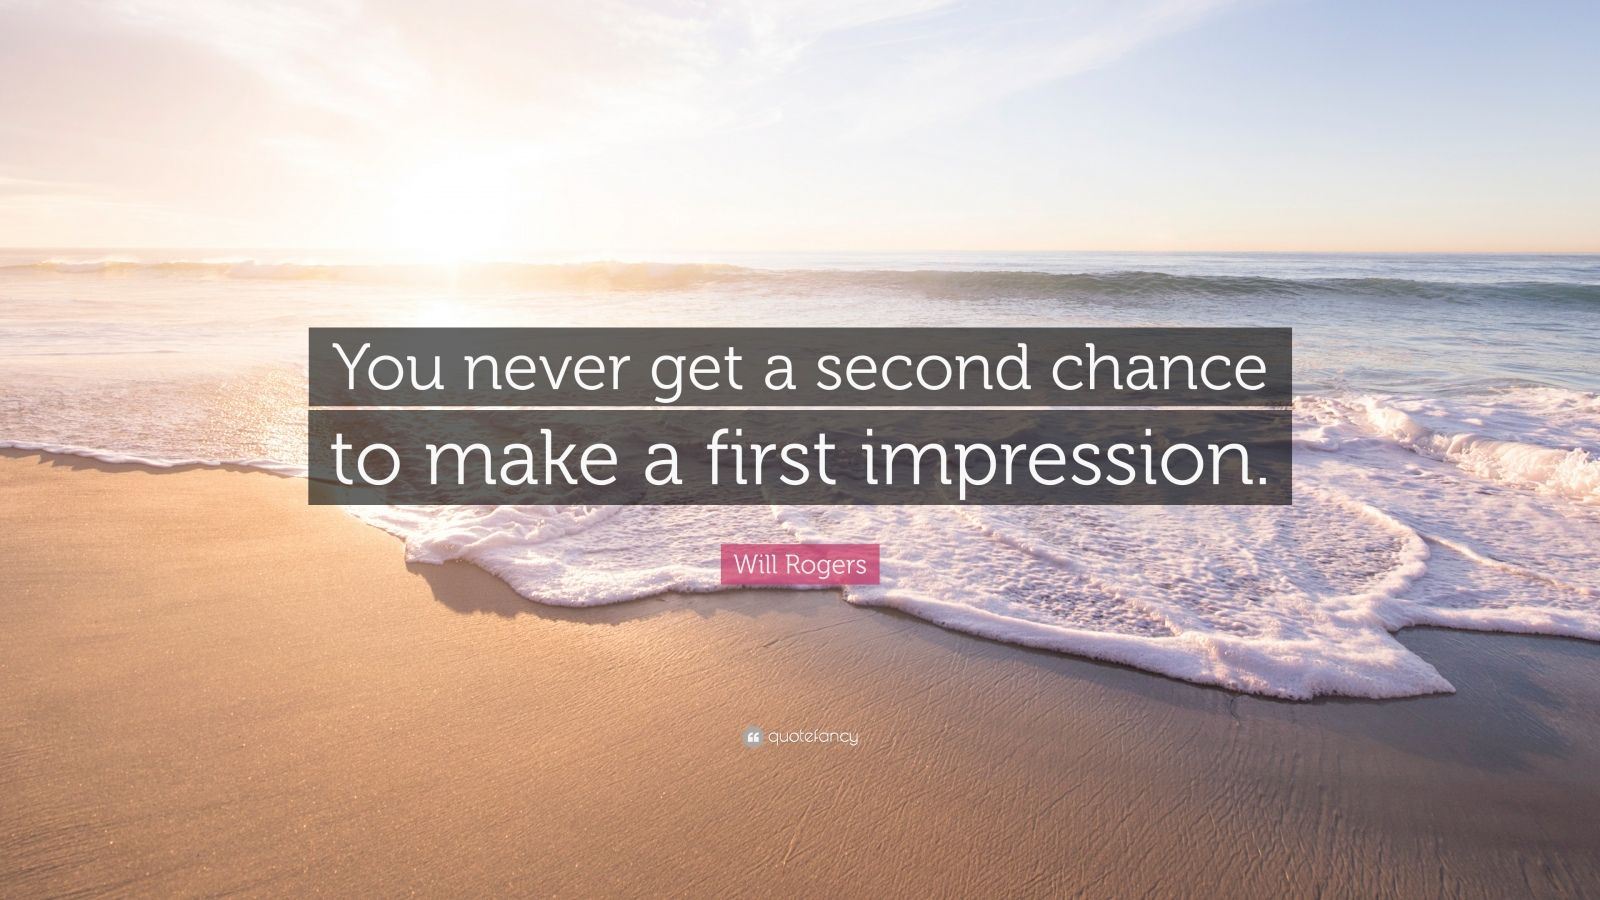 Will Rogers Quote: “You never get a second chance to make a first